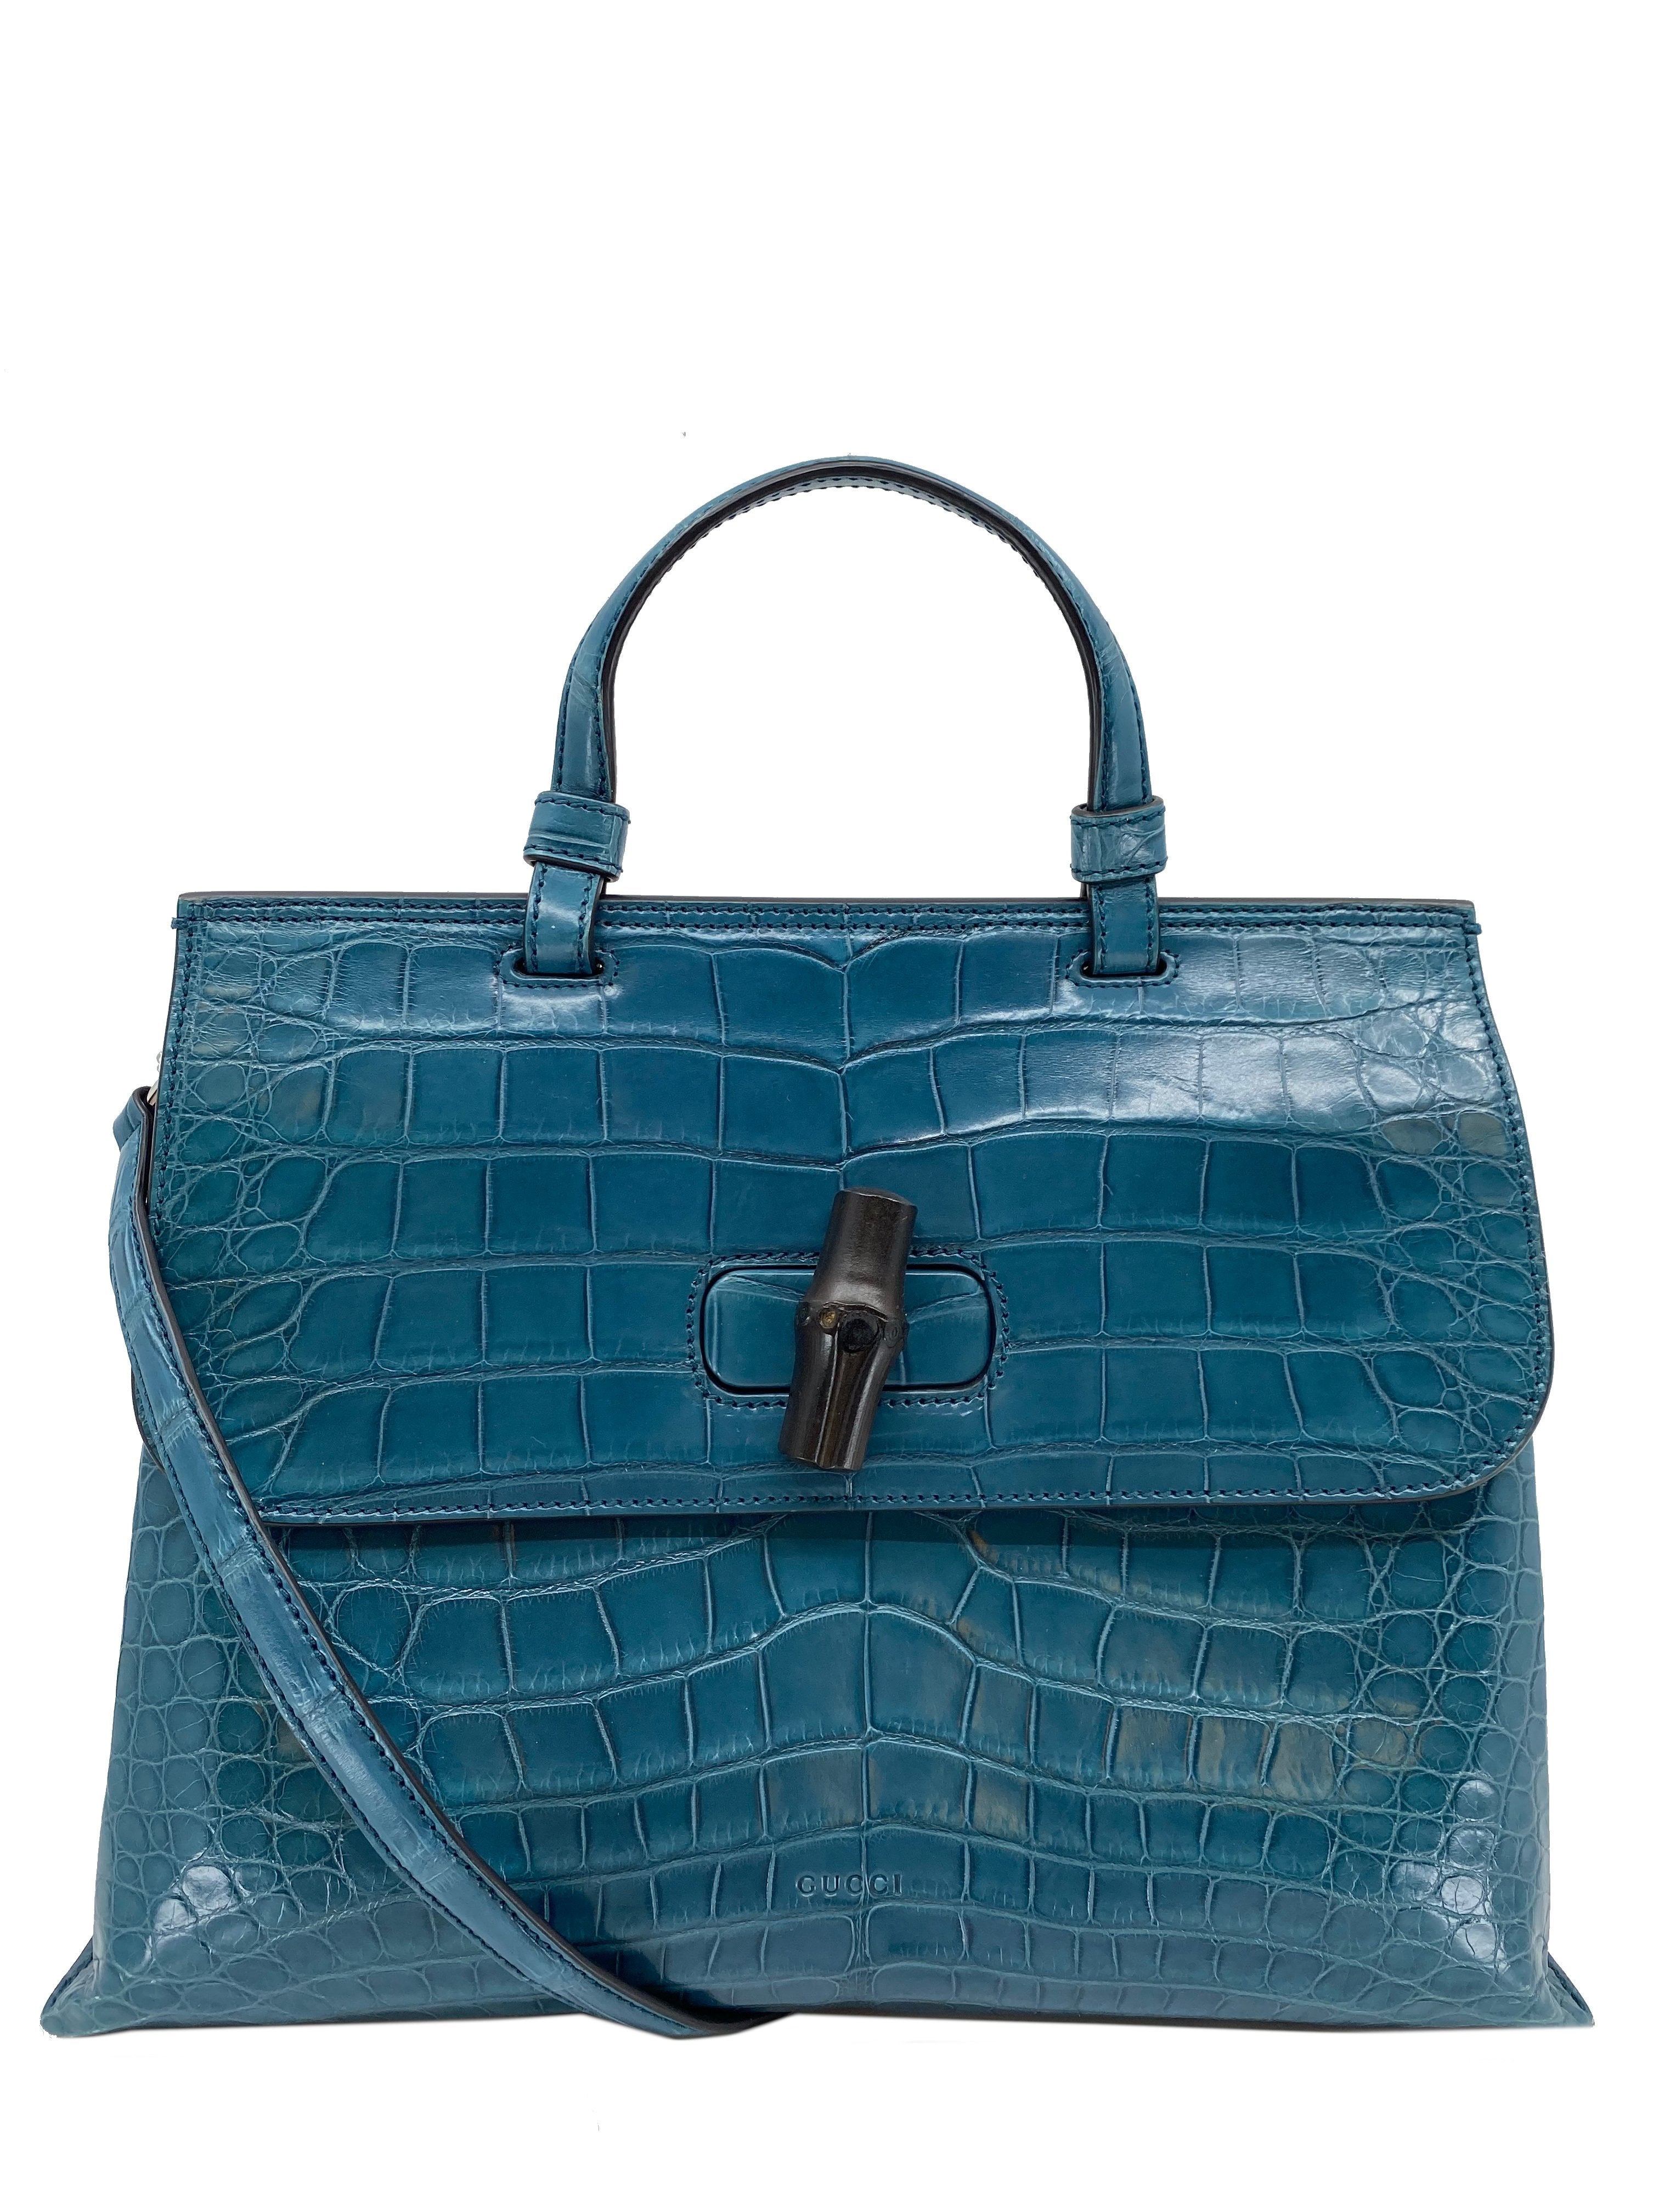 Gucci Bamboo Daily Crocodile Top Handle Bag - Consigned Designs